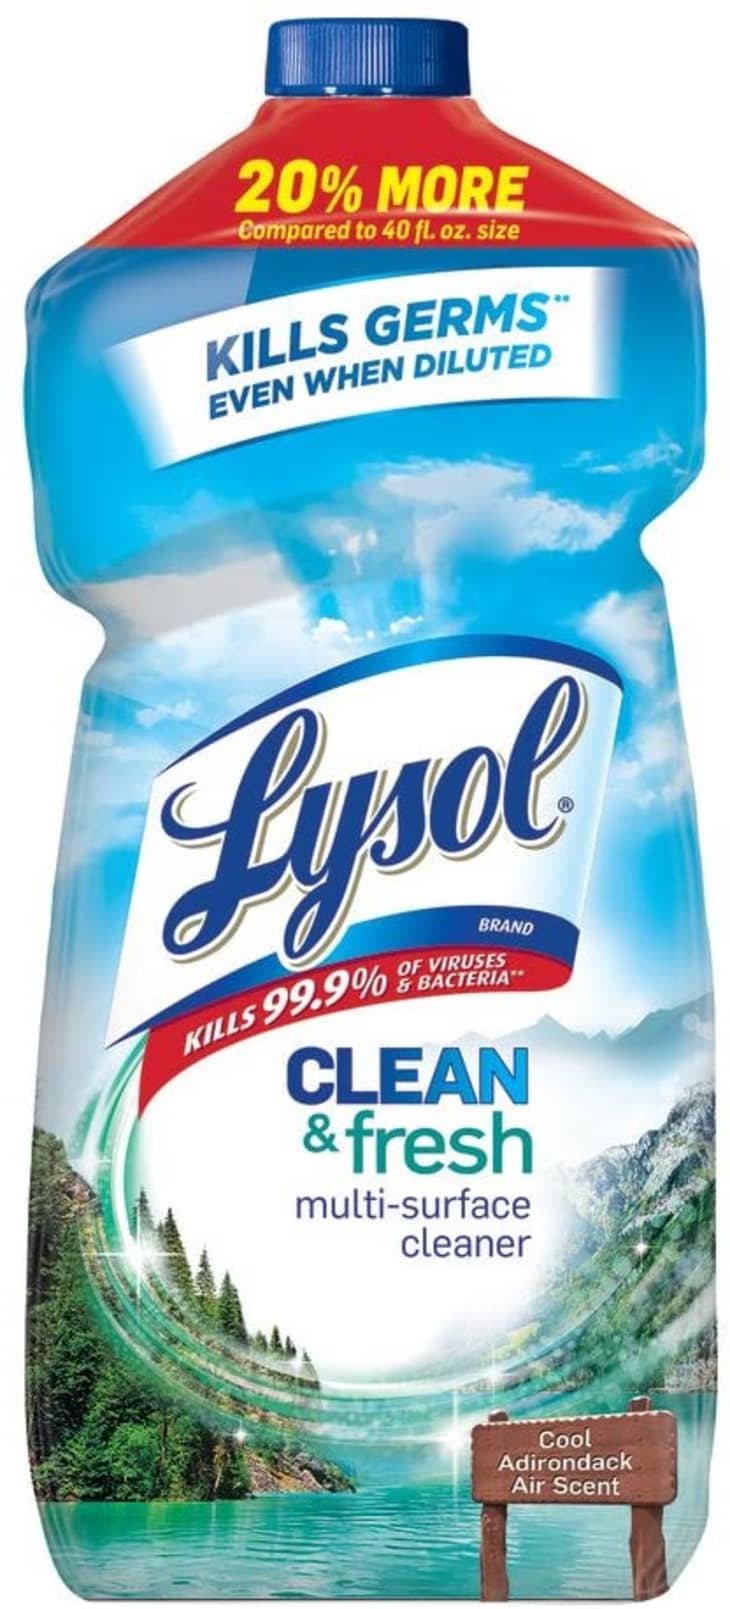 Lysol Clean & Fresh Multi-Surface Cleaner at Amazon